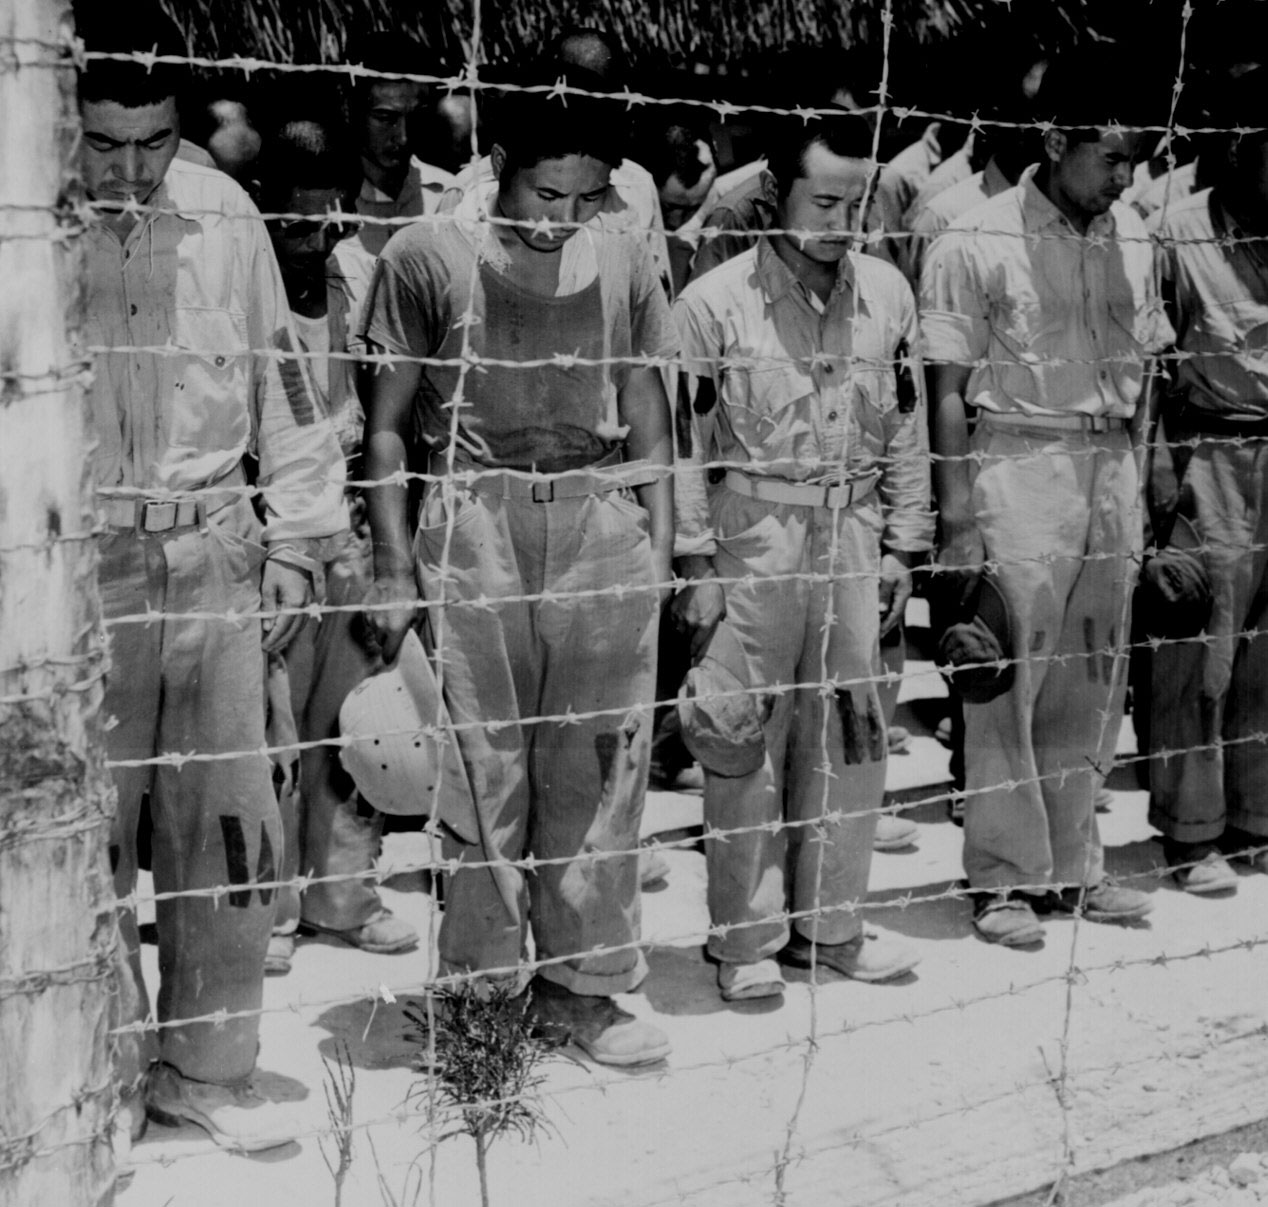 Japanese POWs at Guam bowed their heads after hearing Emperor Showa's surrender announcement, 15 Aug 1945, photo 1 of 2